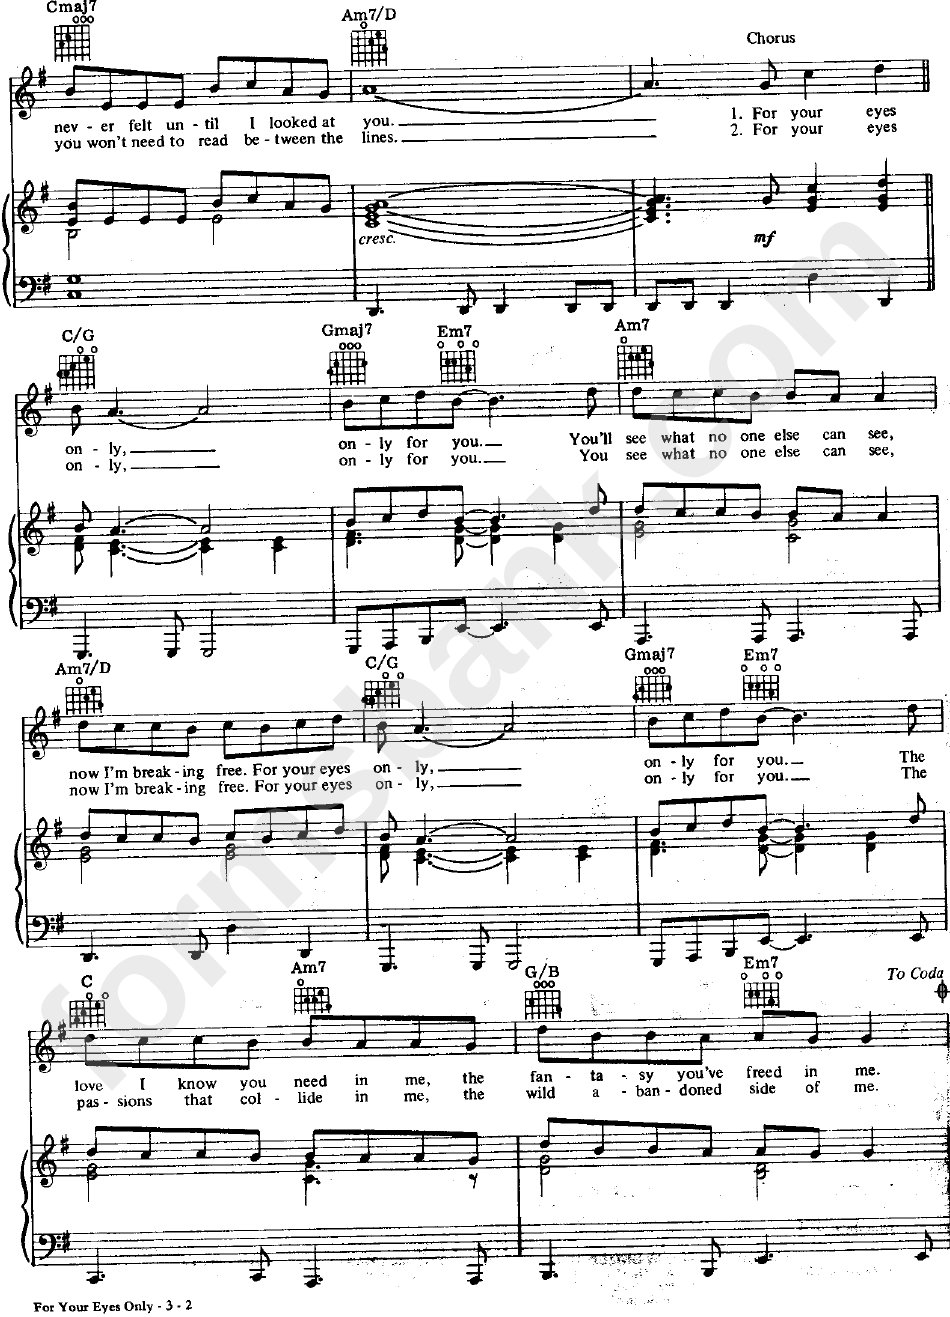 For Your Eyes Only (Sheet Music) - Bill Conti